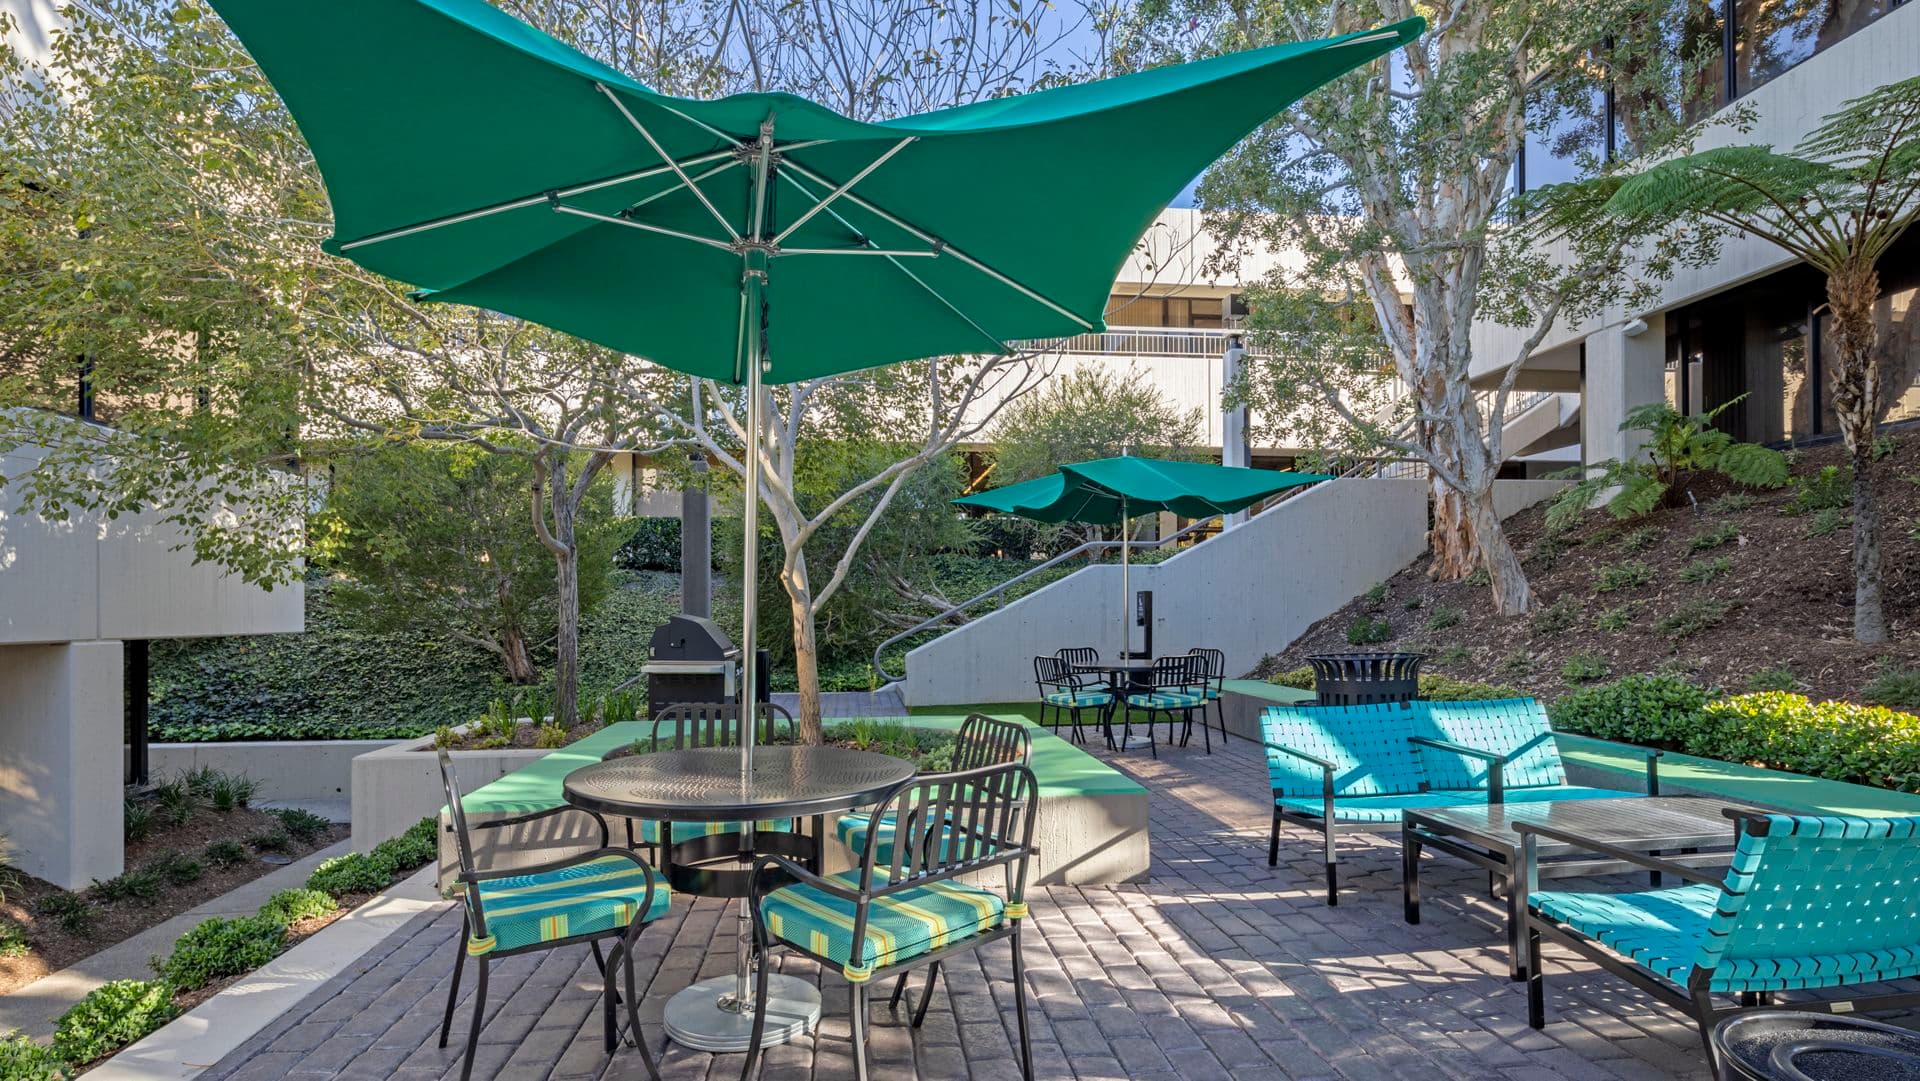 After photography of the outdoor workspace reinvestment at Gateway Plaza in Newport Beach, CA